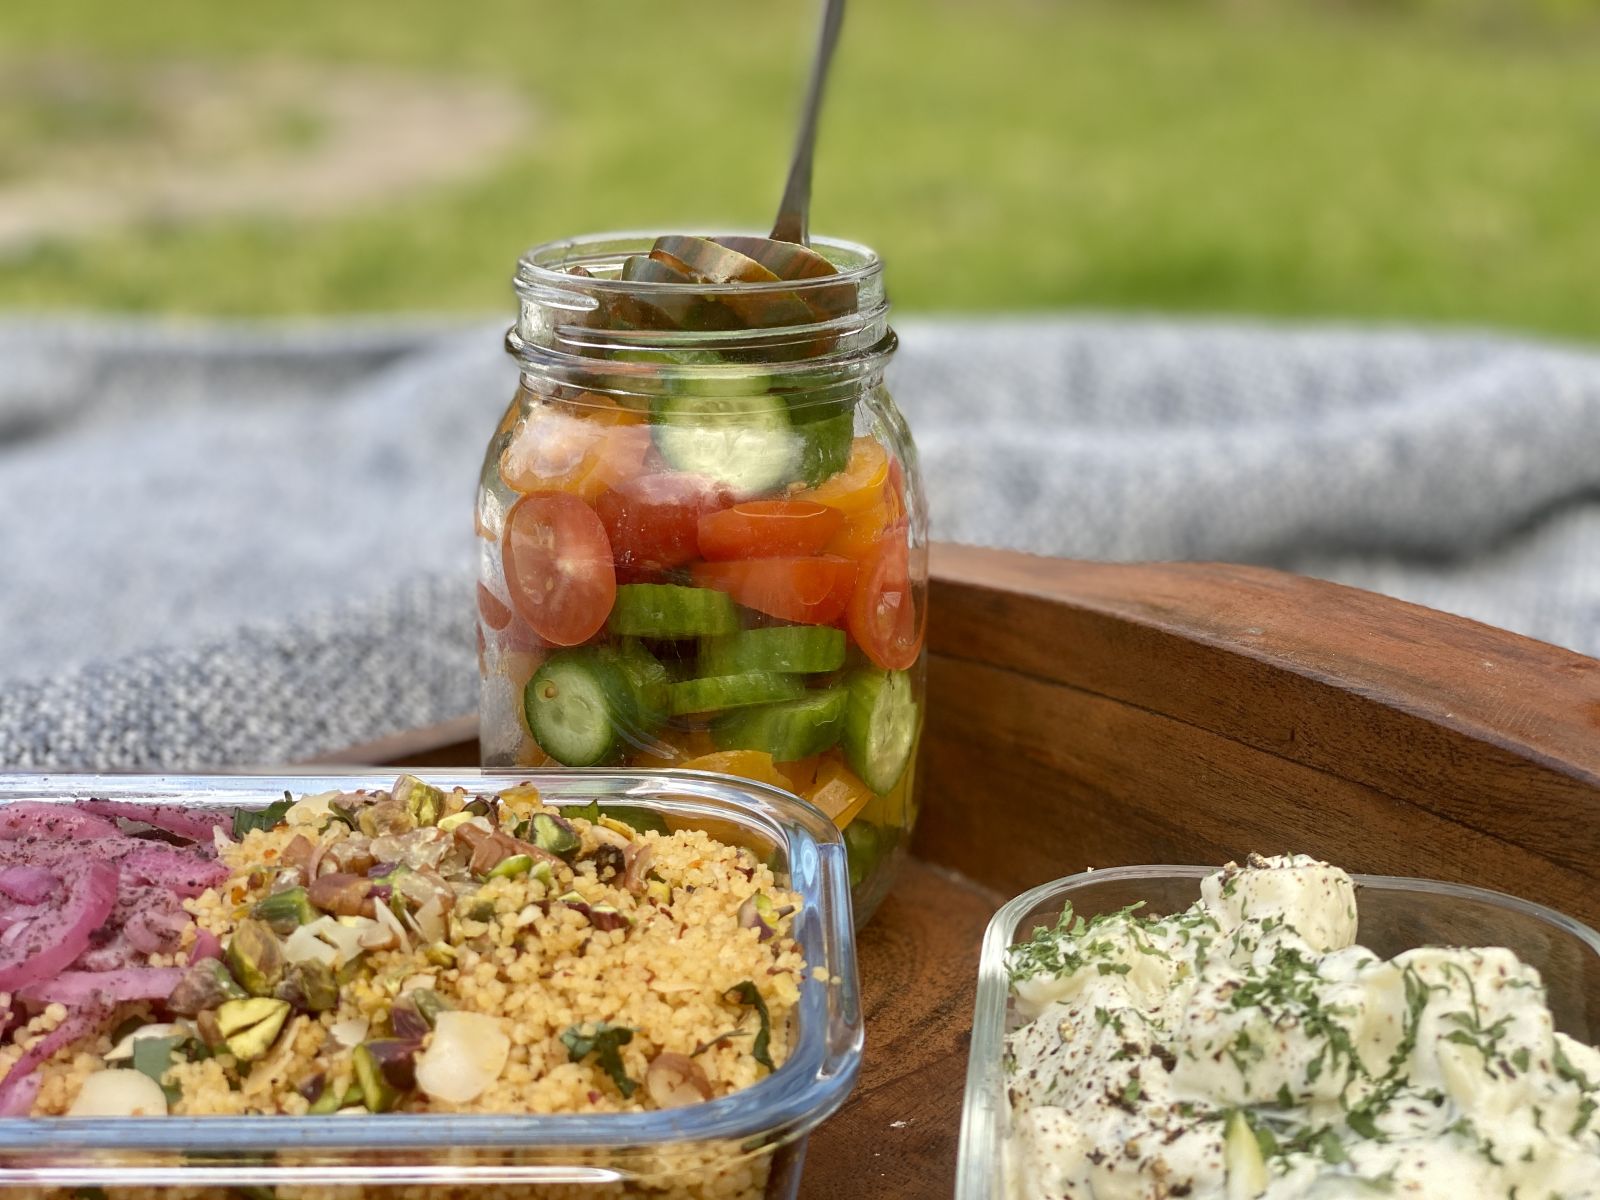 A jar with layers of mini heirloom tomatoes and baby cucumber slices on a picnic blanket with couscous and potato salad